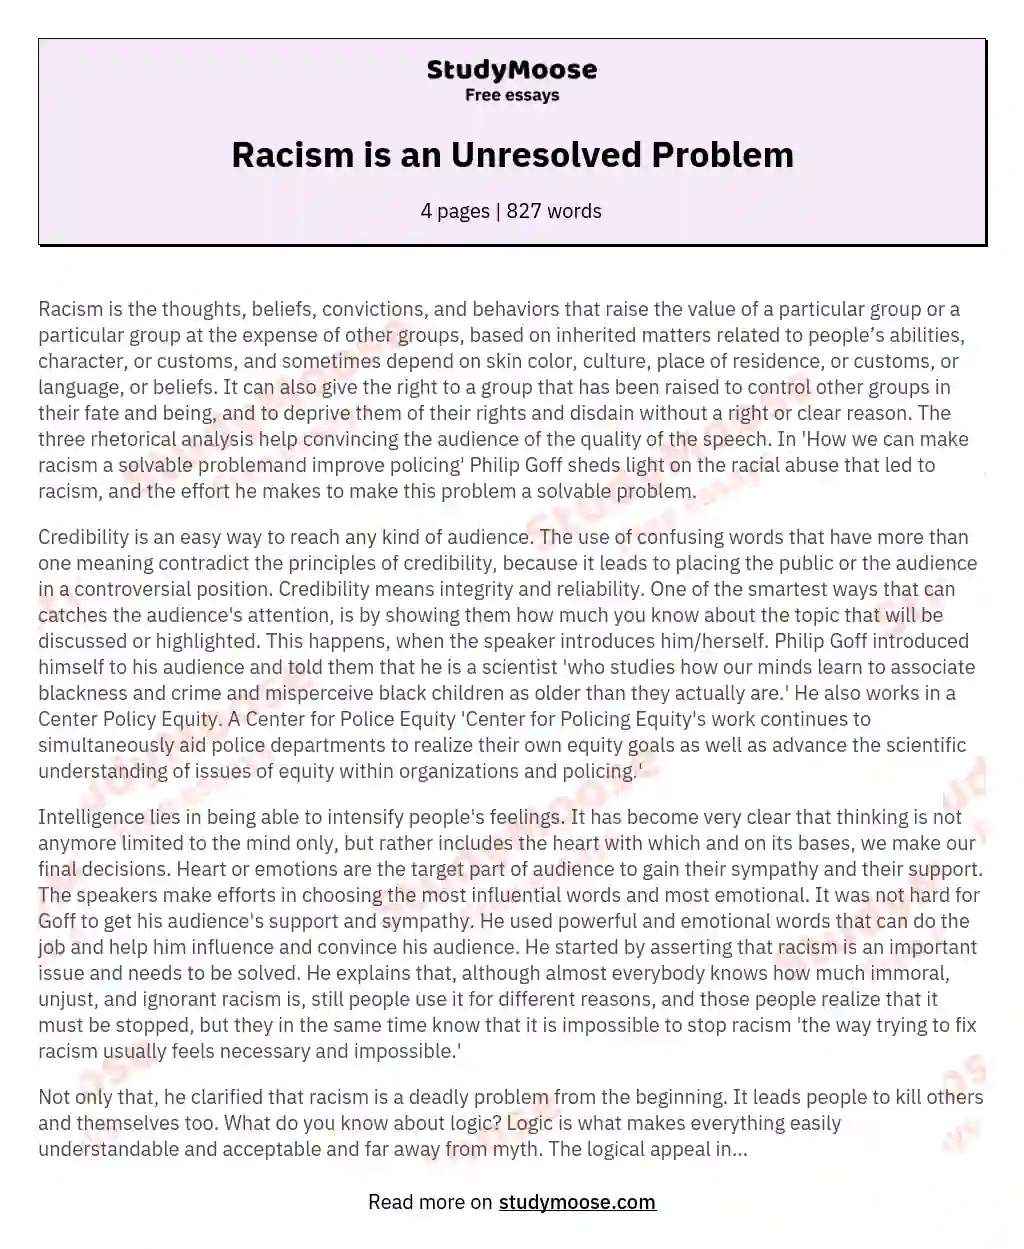 Racism is an Unresolved Problem